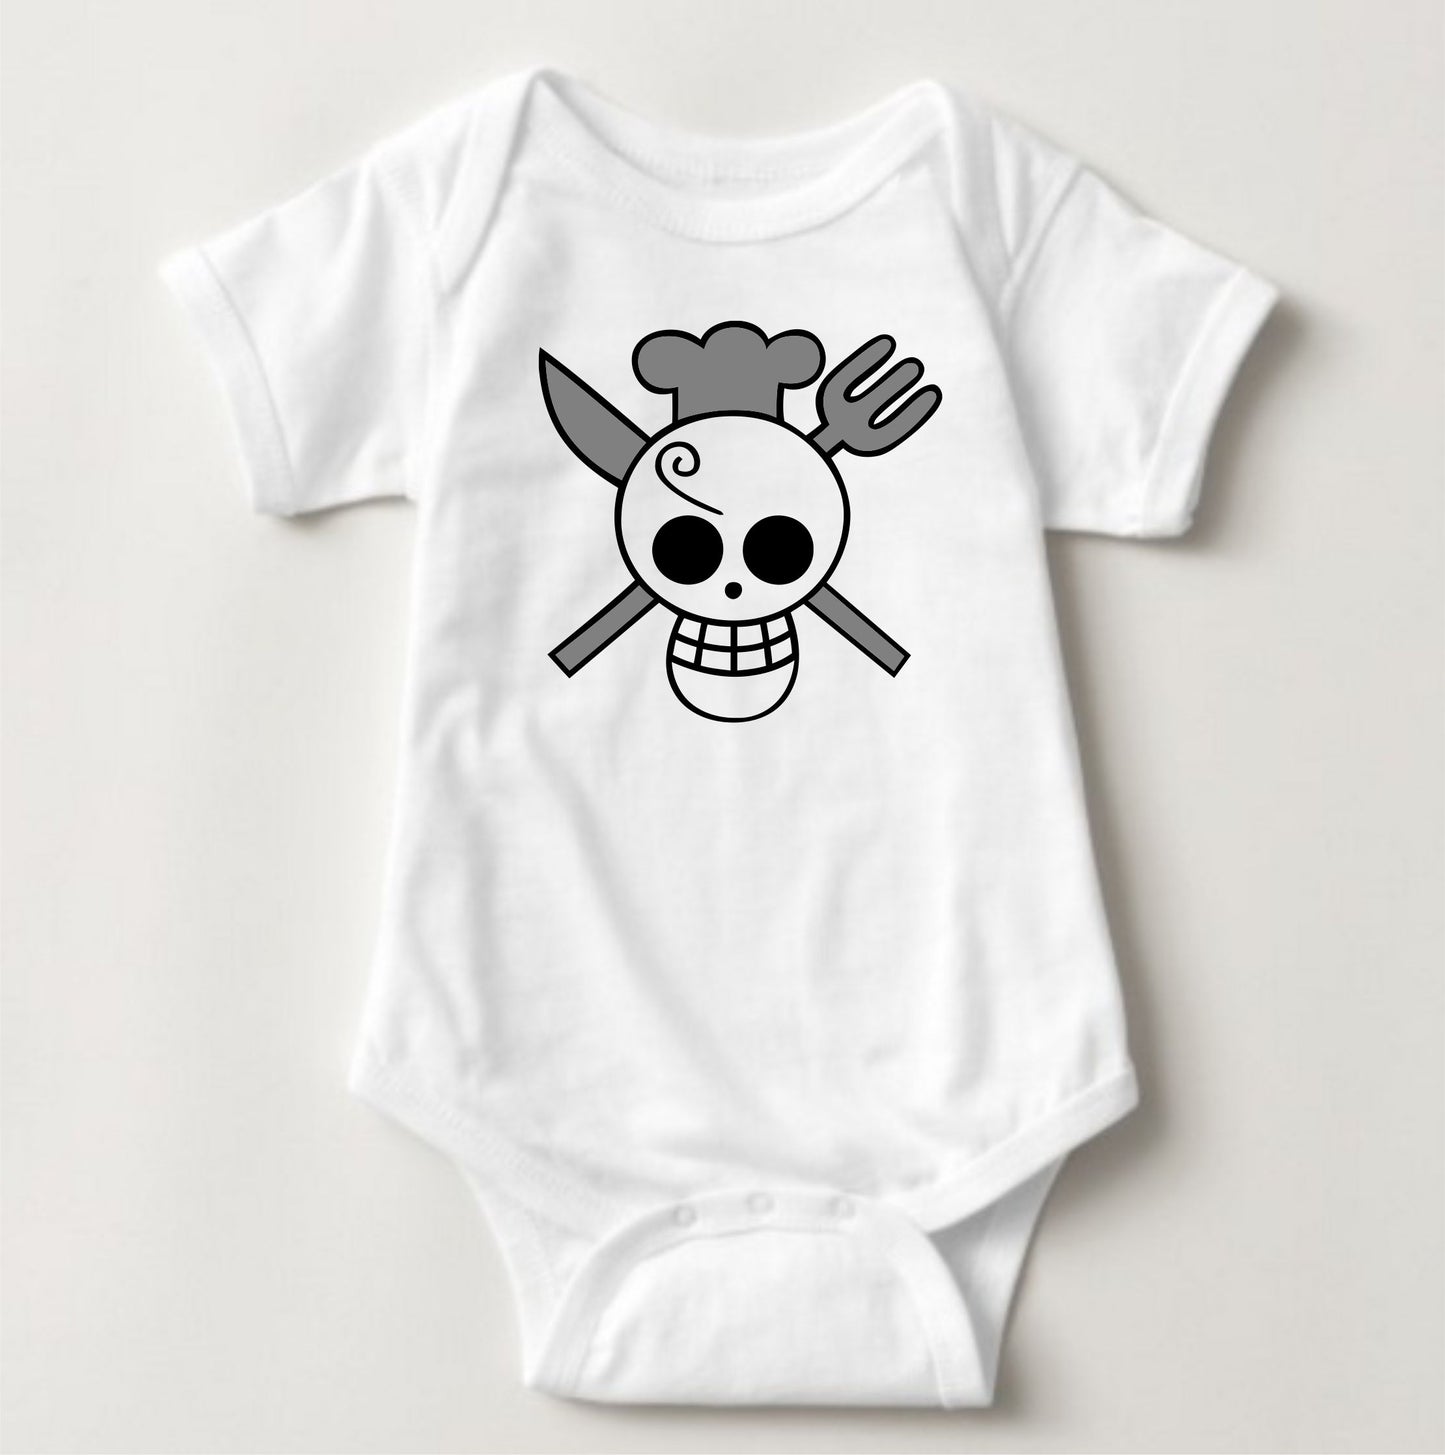 Baby Character Onesies - Jolly Roger One Piece Sanji